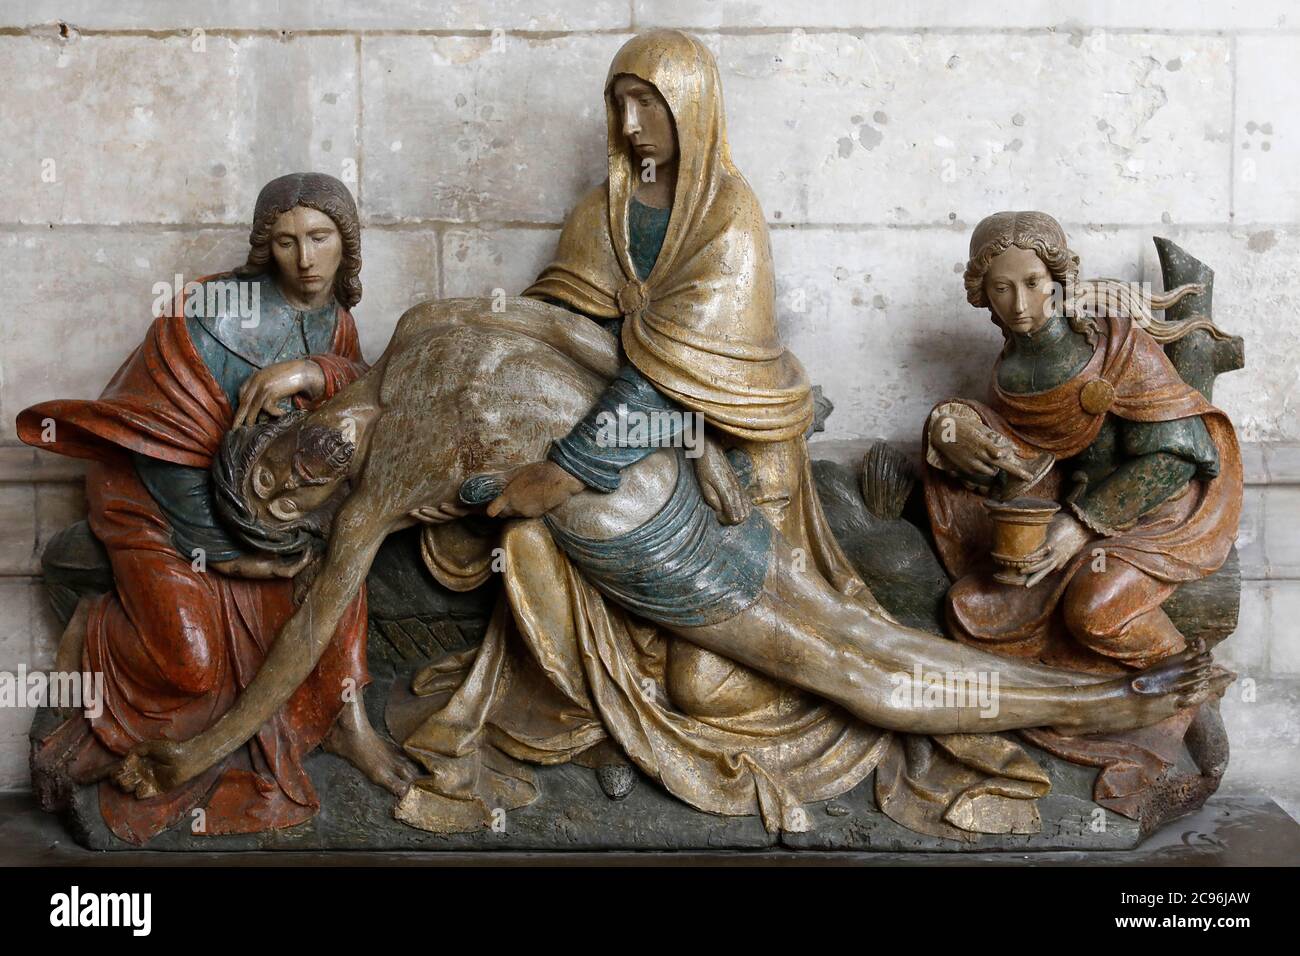 Entombment sculpture in Notre Dame (Our Lady) cathedral, Evreux, France. Stock Photo